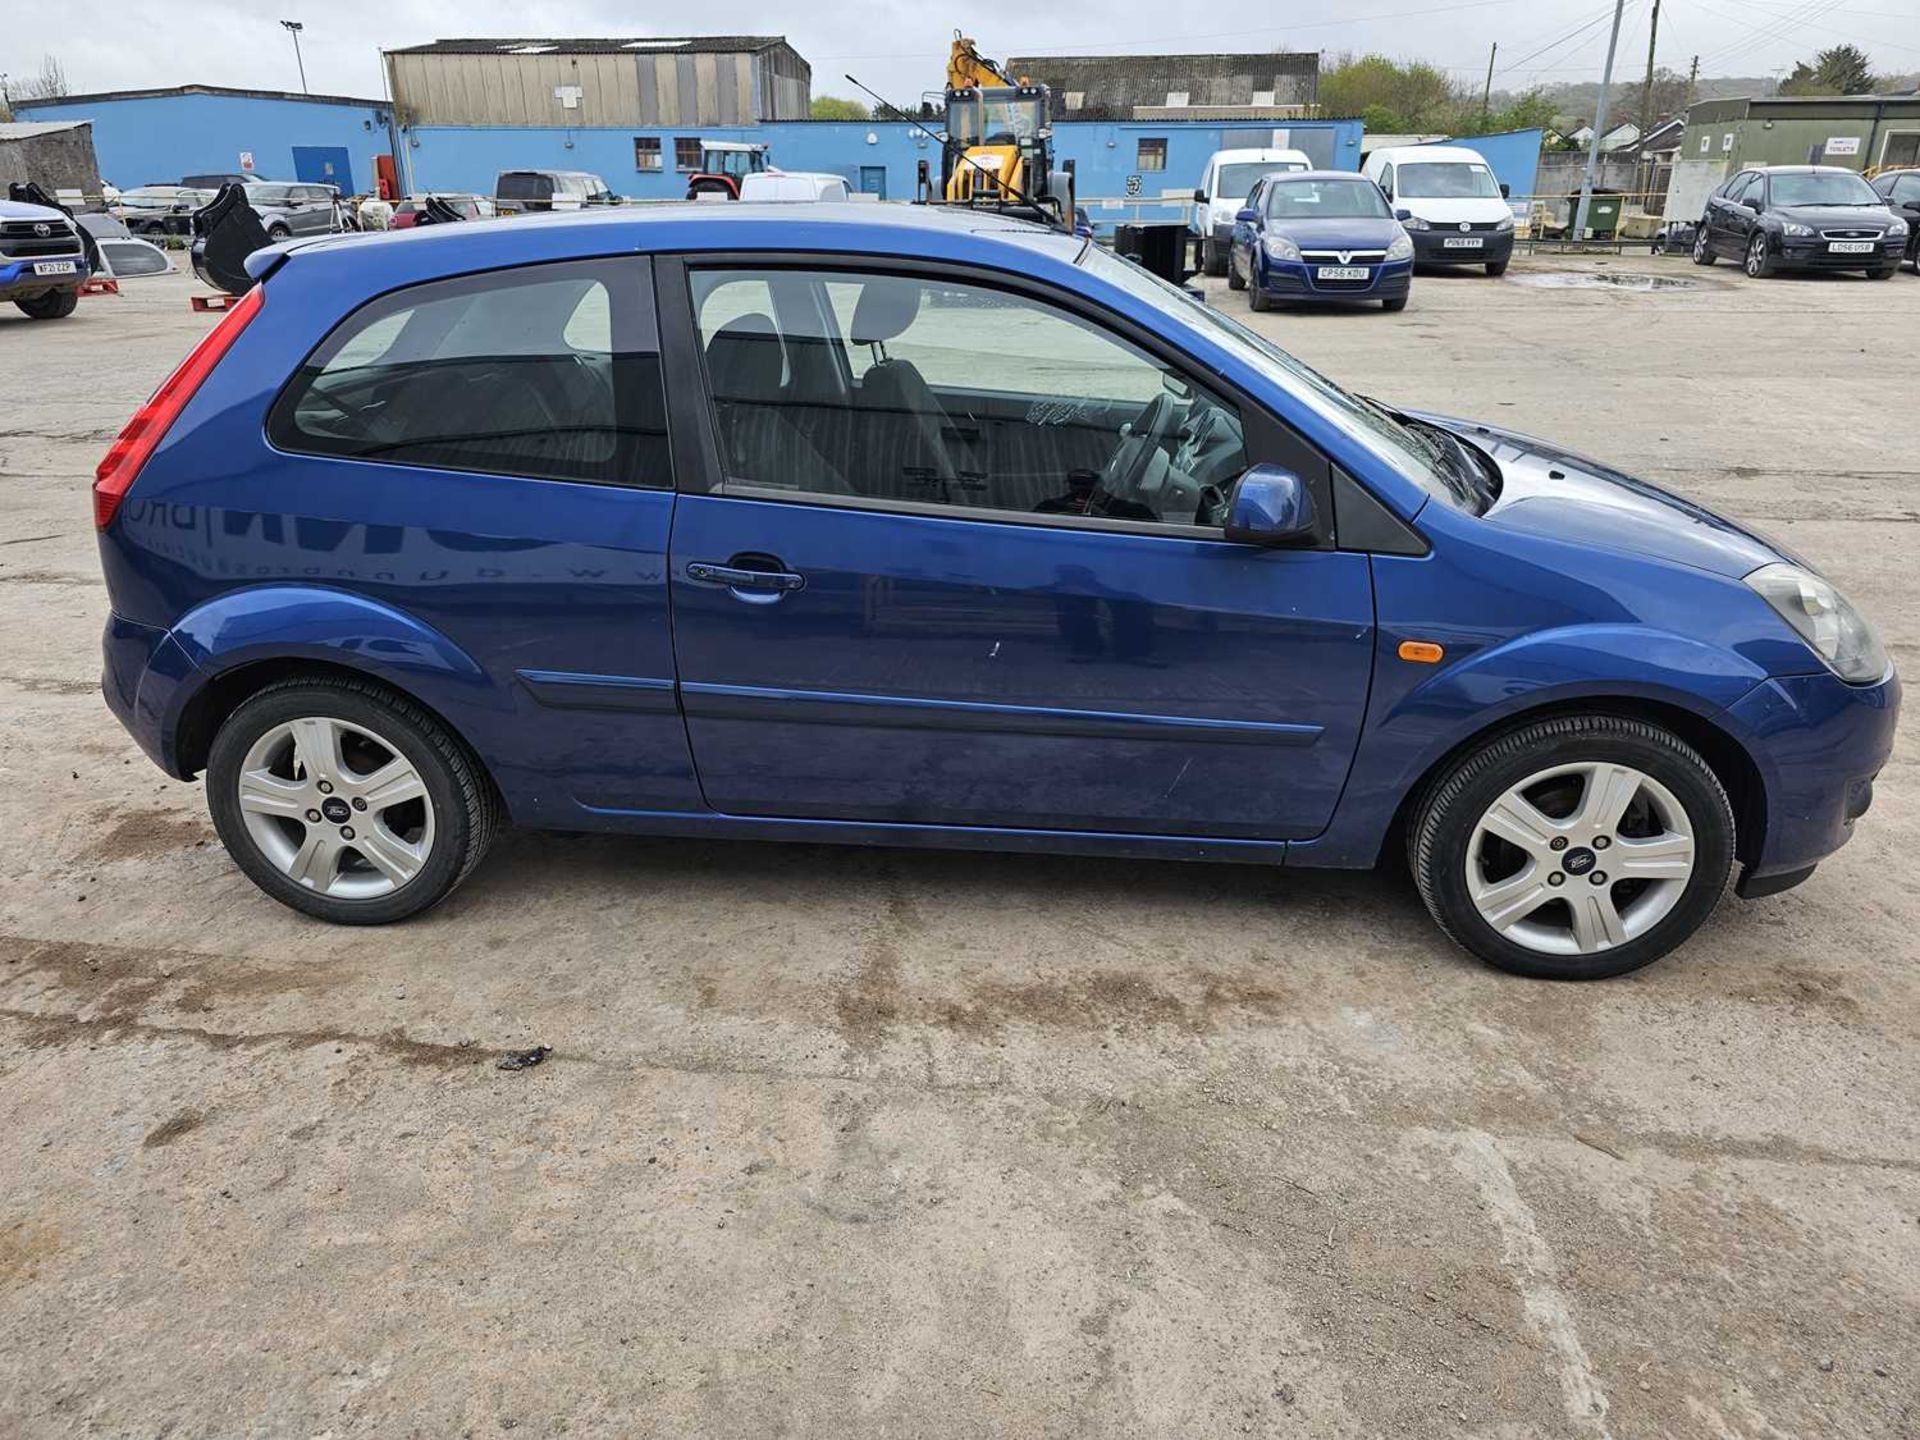 2007 Ford Fiesta Zetec Climate, 5 Speed, A/C - Image 6 of 25